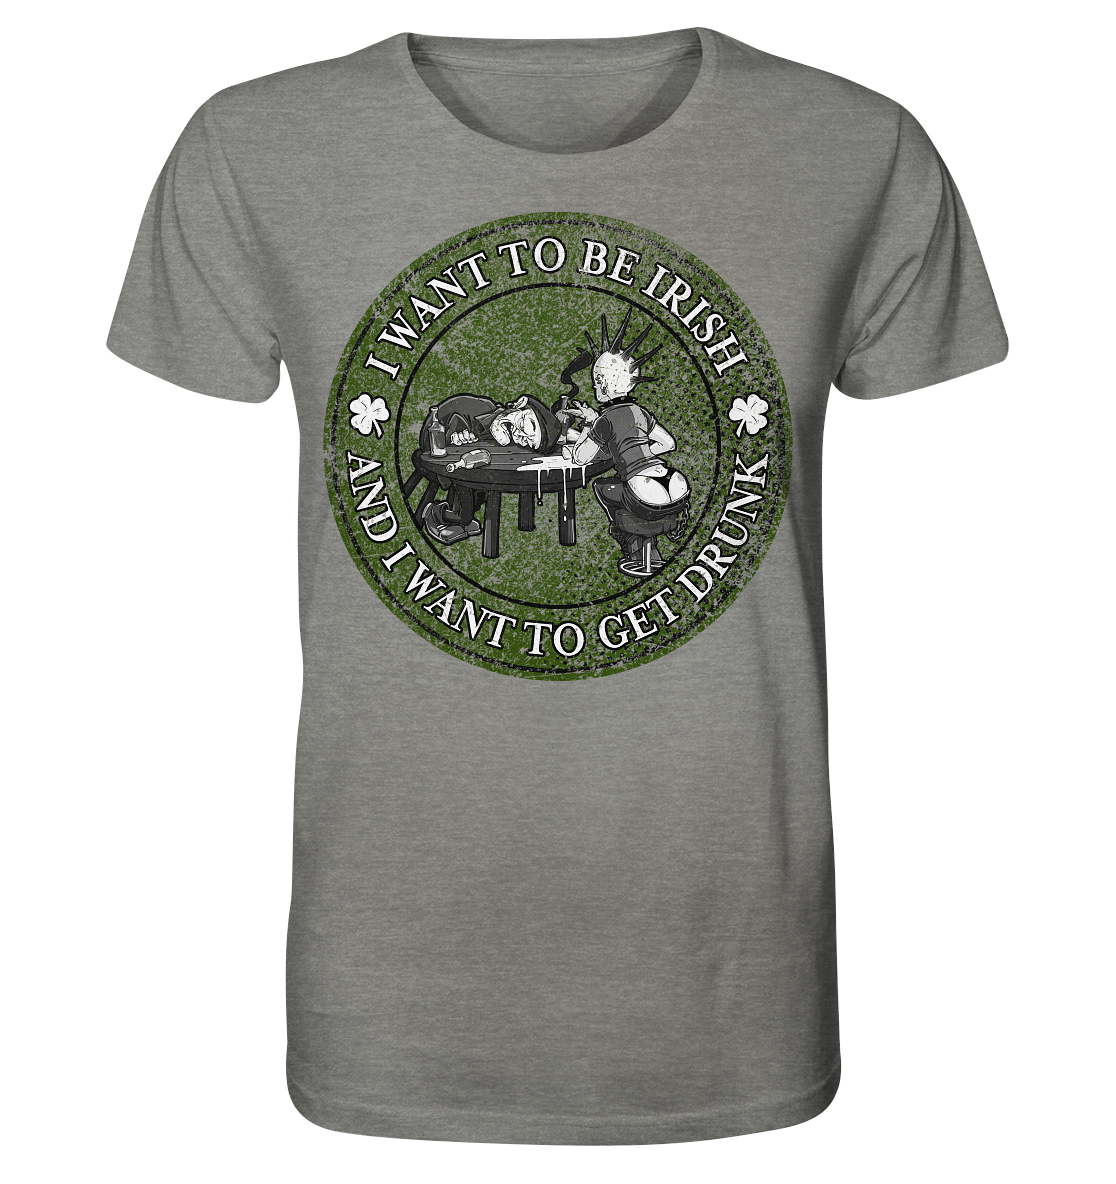 I Want To Be Irish And I Want To Get Drunk - Organic Shirt (meliert)